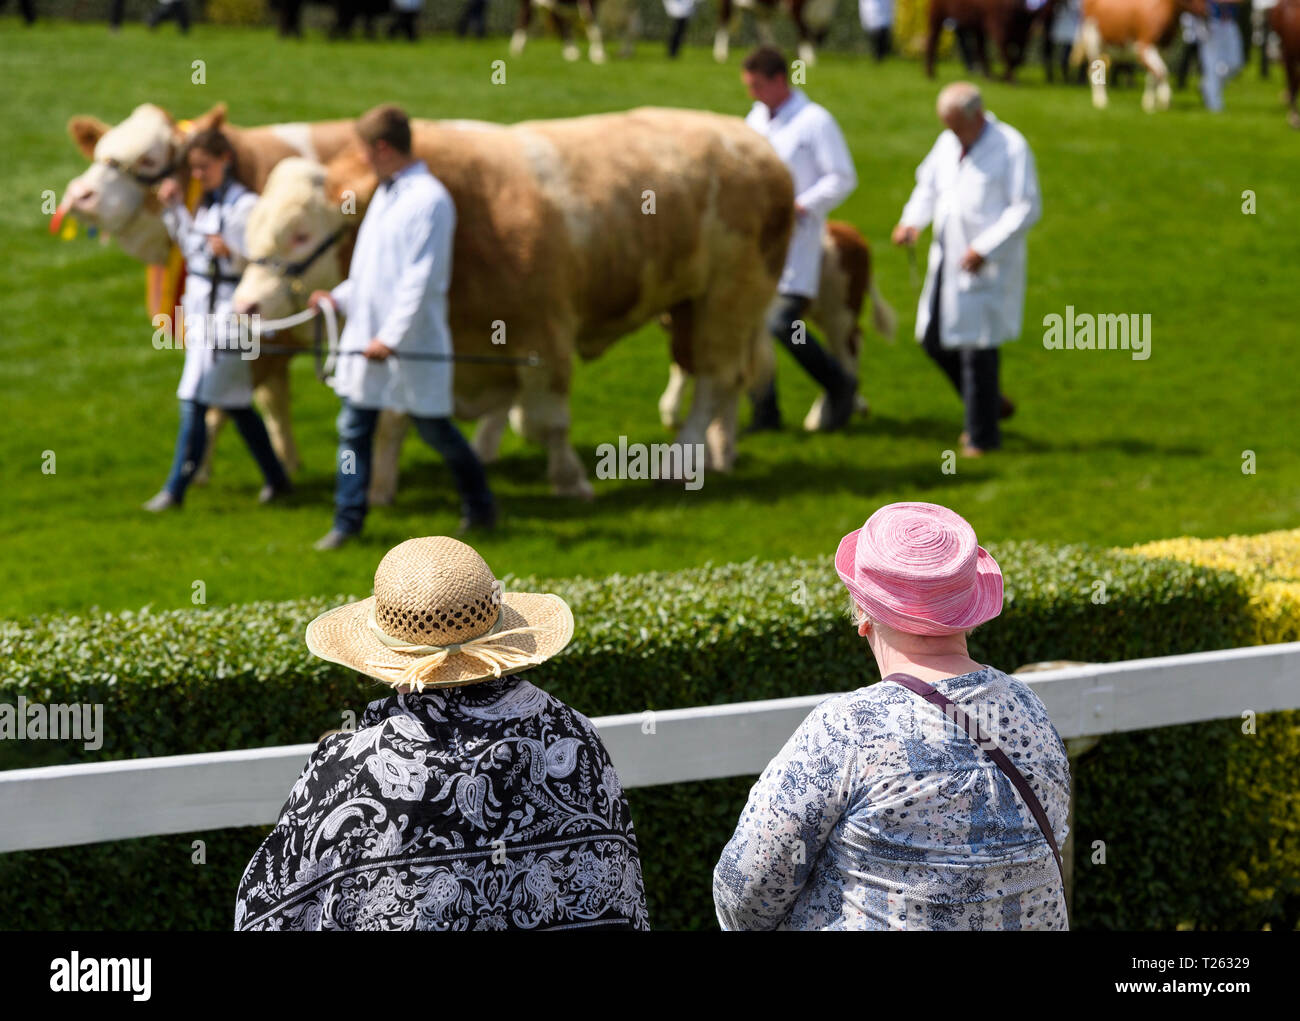 Pair of continental beef cattle walk with handlers around arena watched by spectators in sun hats - The Great Yorkshire Show, Harrogate, England, UK. Stock Photo